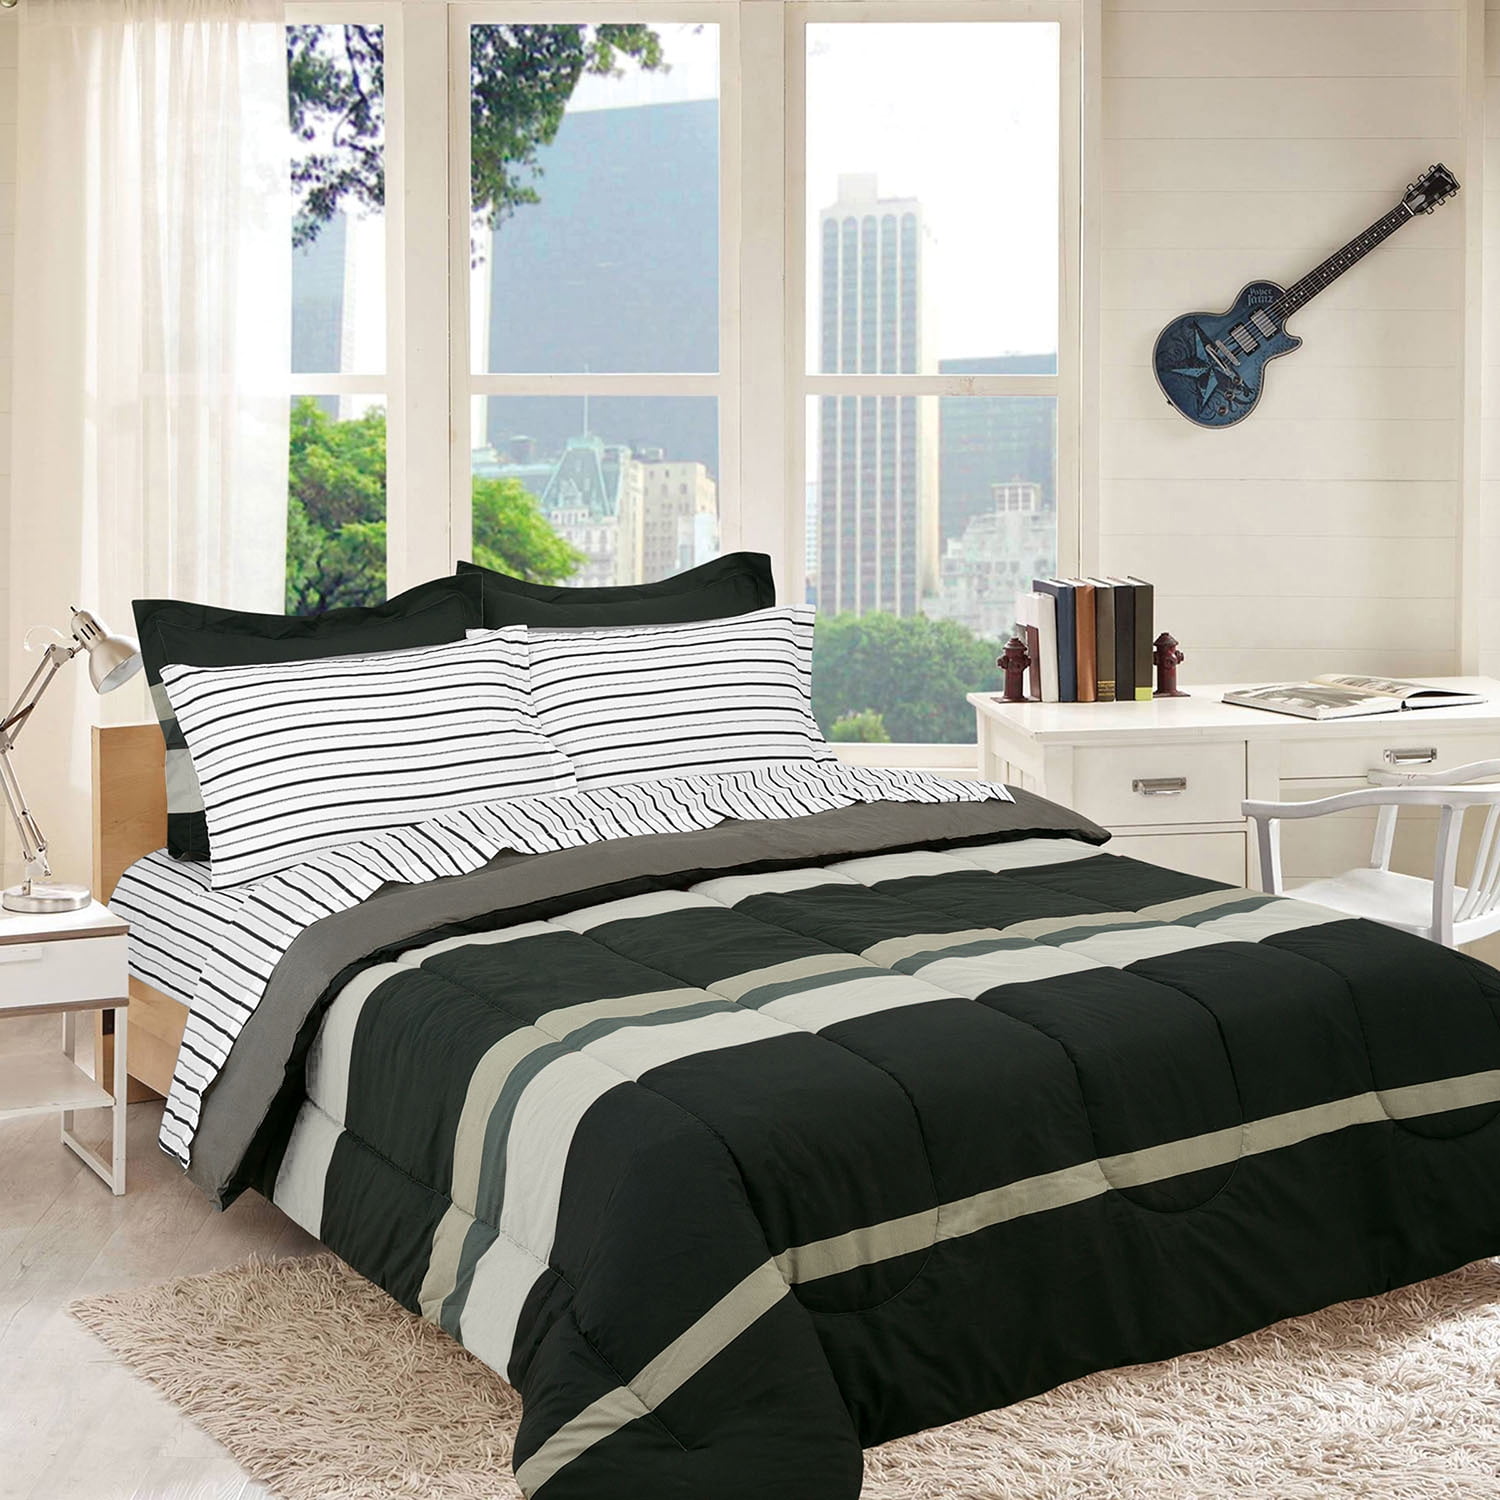 Details about   Navy Blue Green Rugby Striped 7 pc Comforter Sheet Set Twin Full Queen Bed Bag 